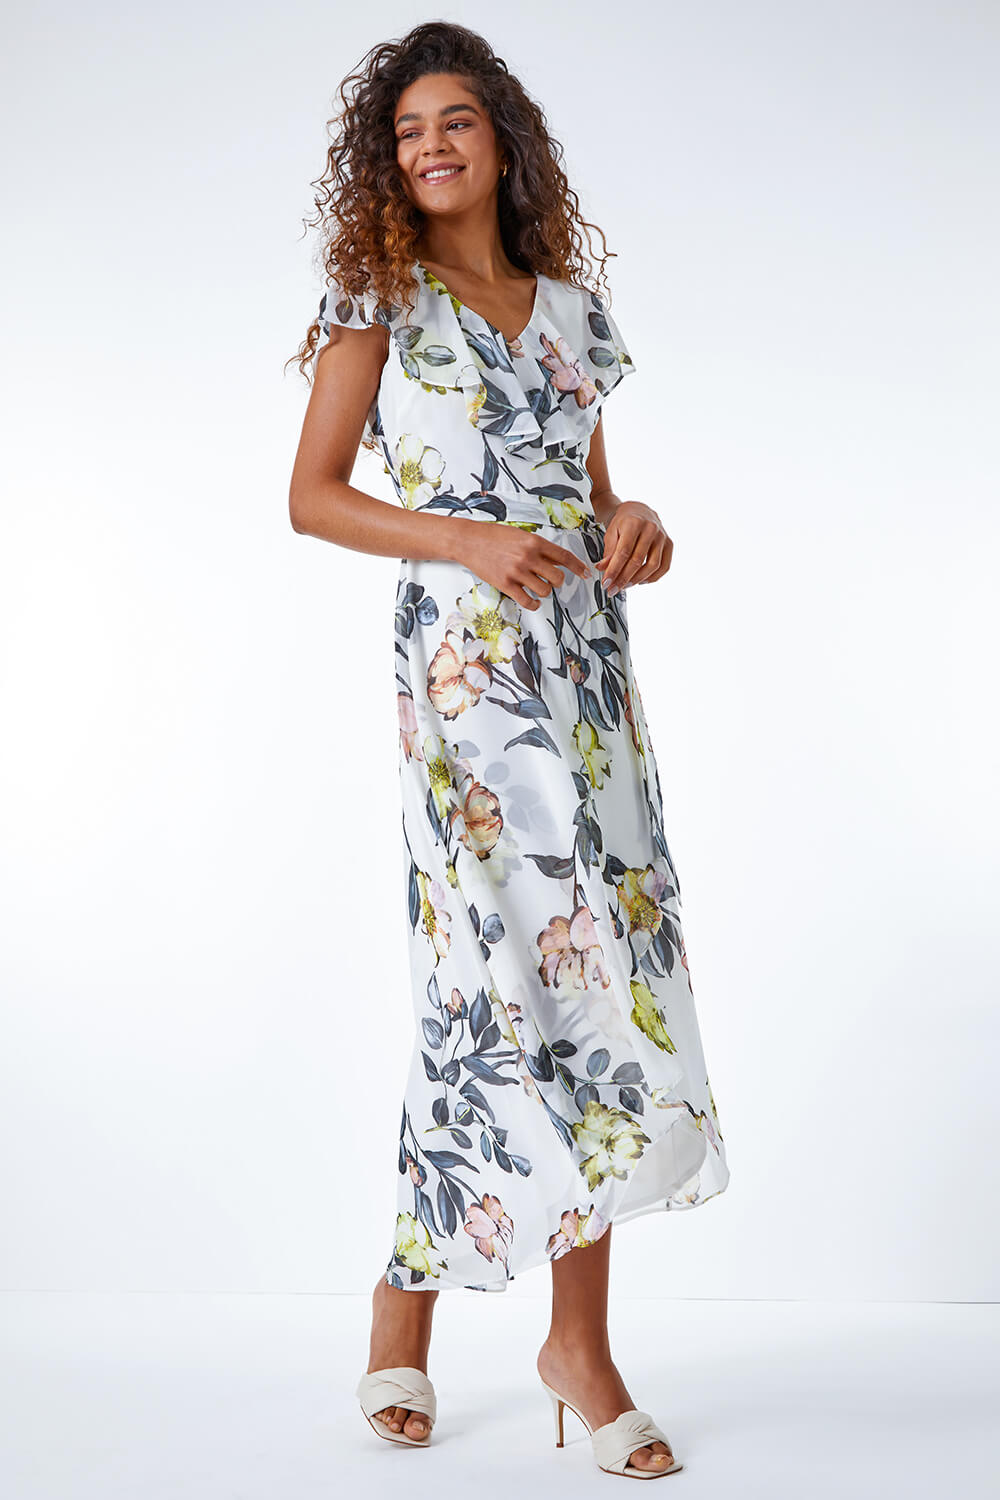 Ivory  Floral Print Frill Cape Wrap Dress, Image 4 of 5